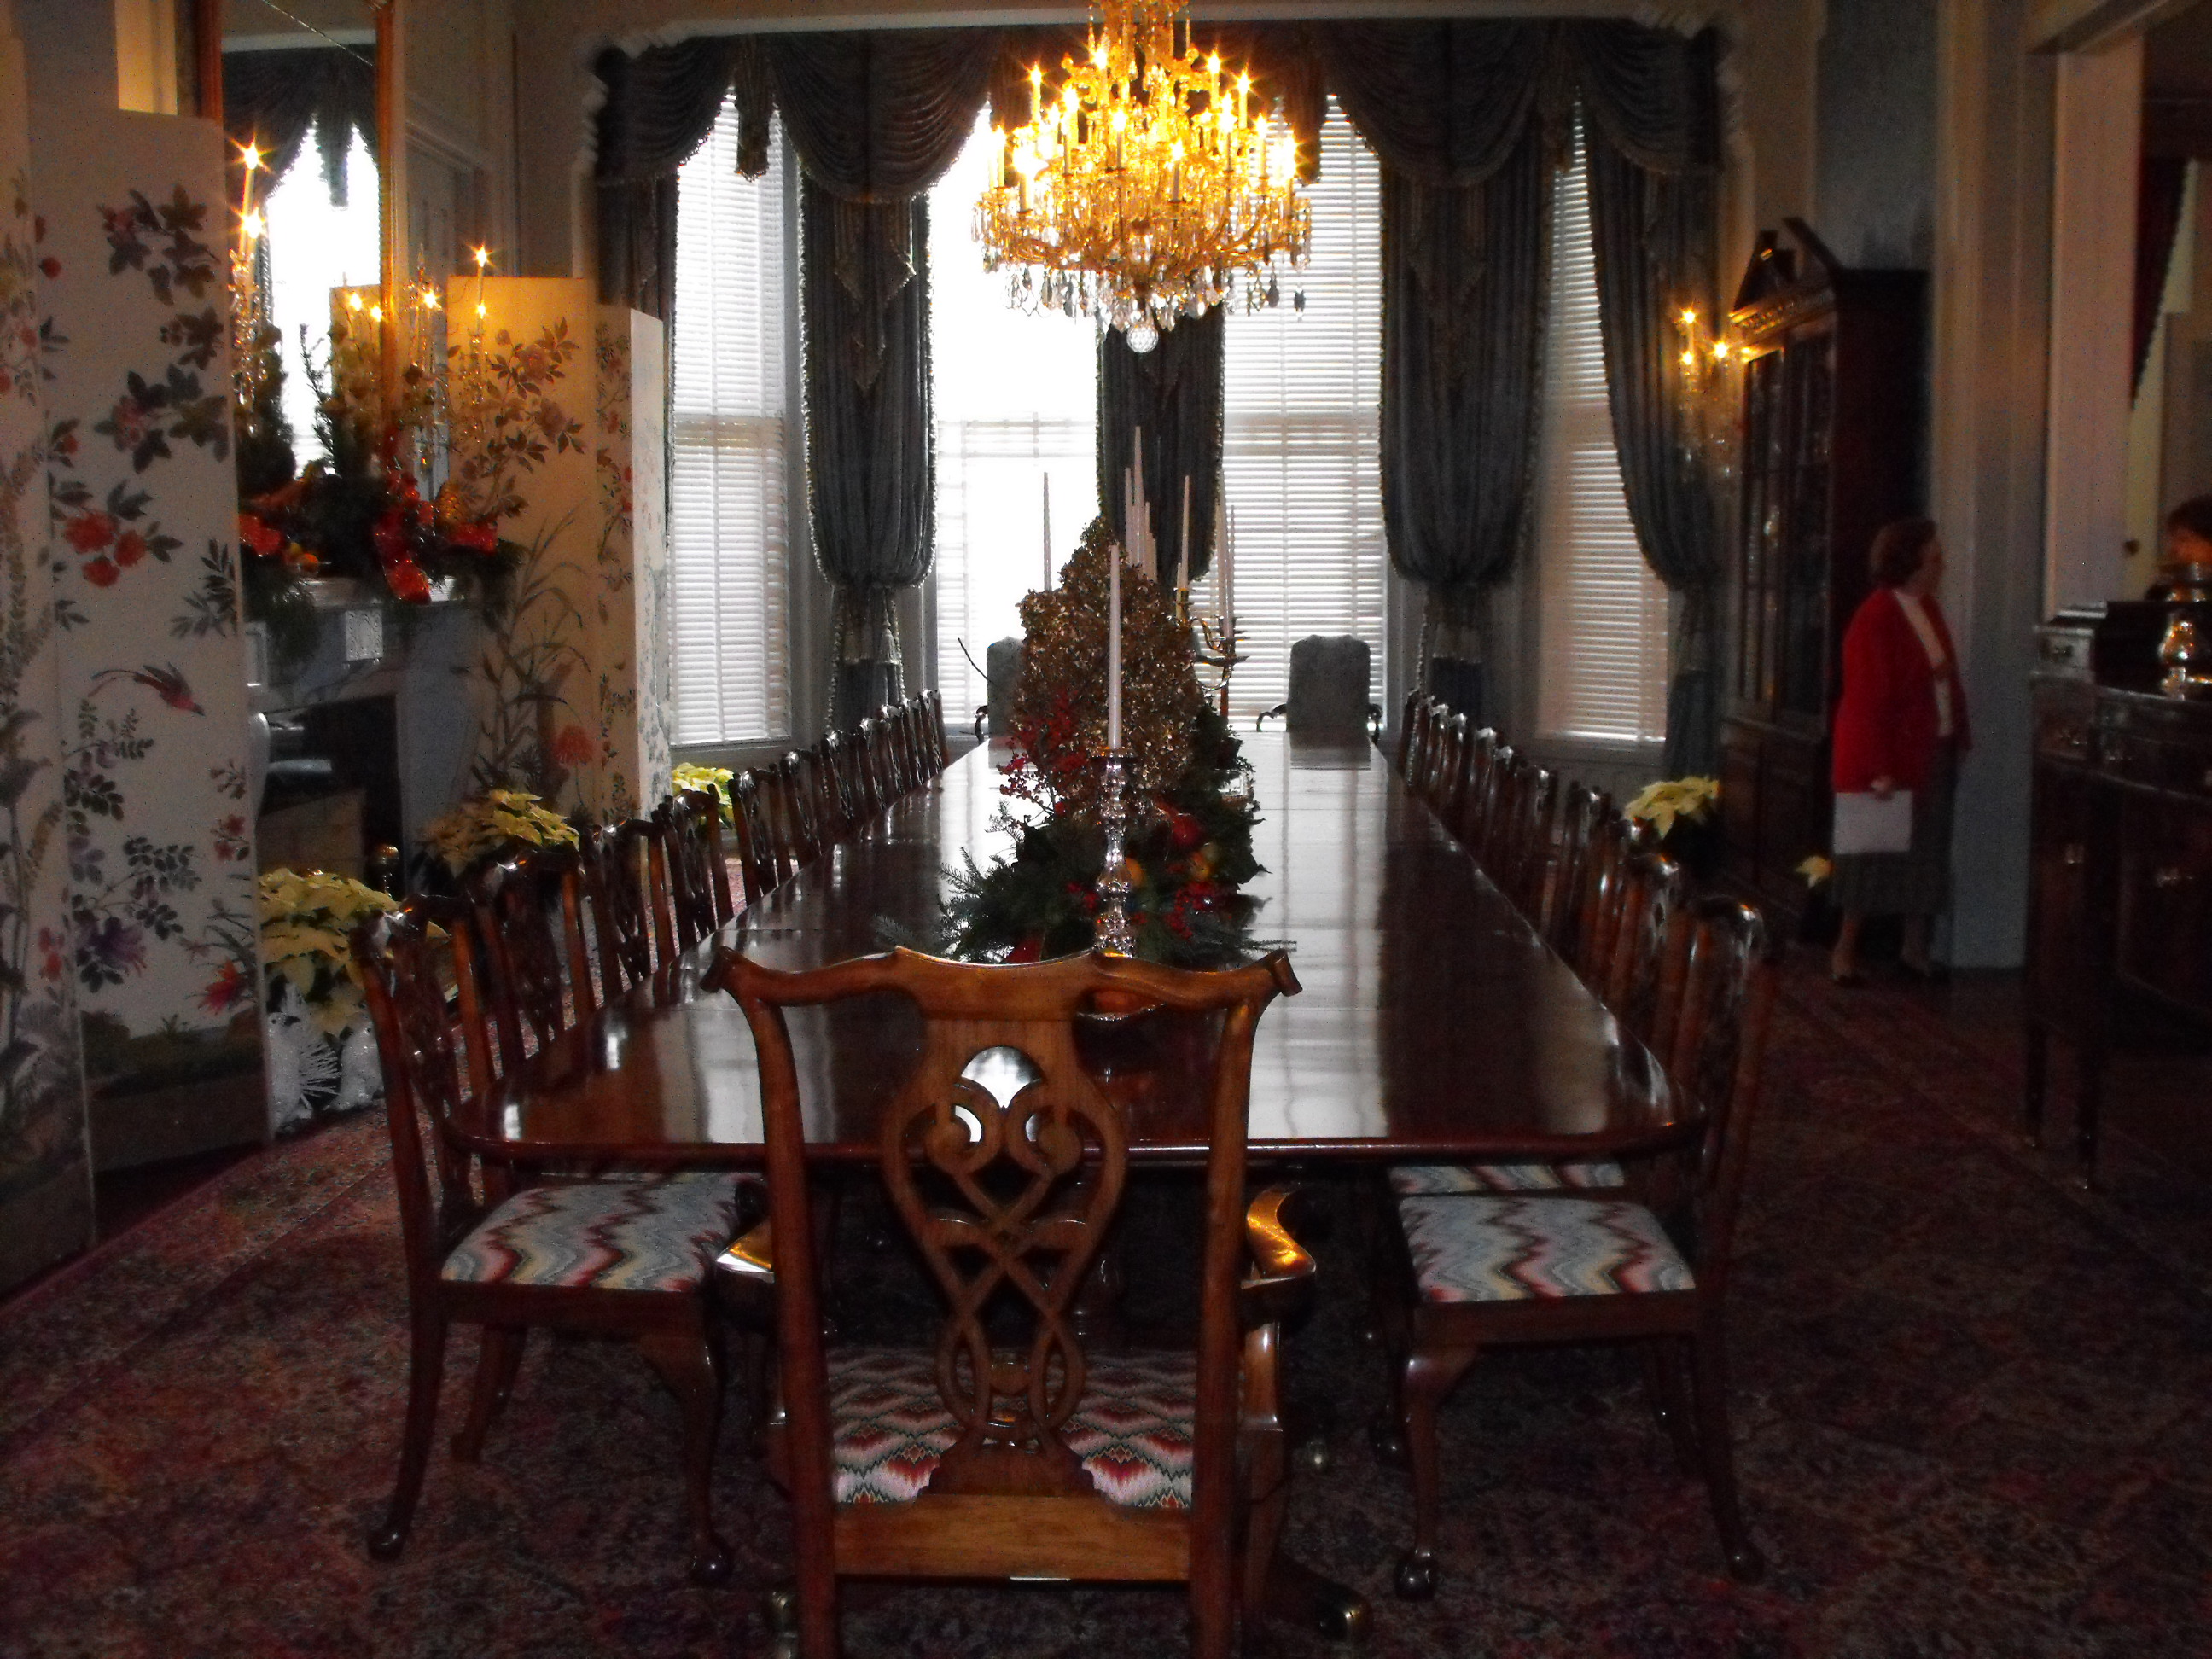 ./2009/BHS Governor's House/Acap Governors Mansion0009.JPG